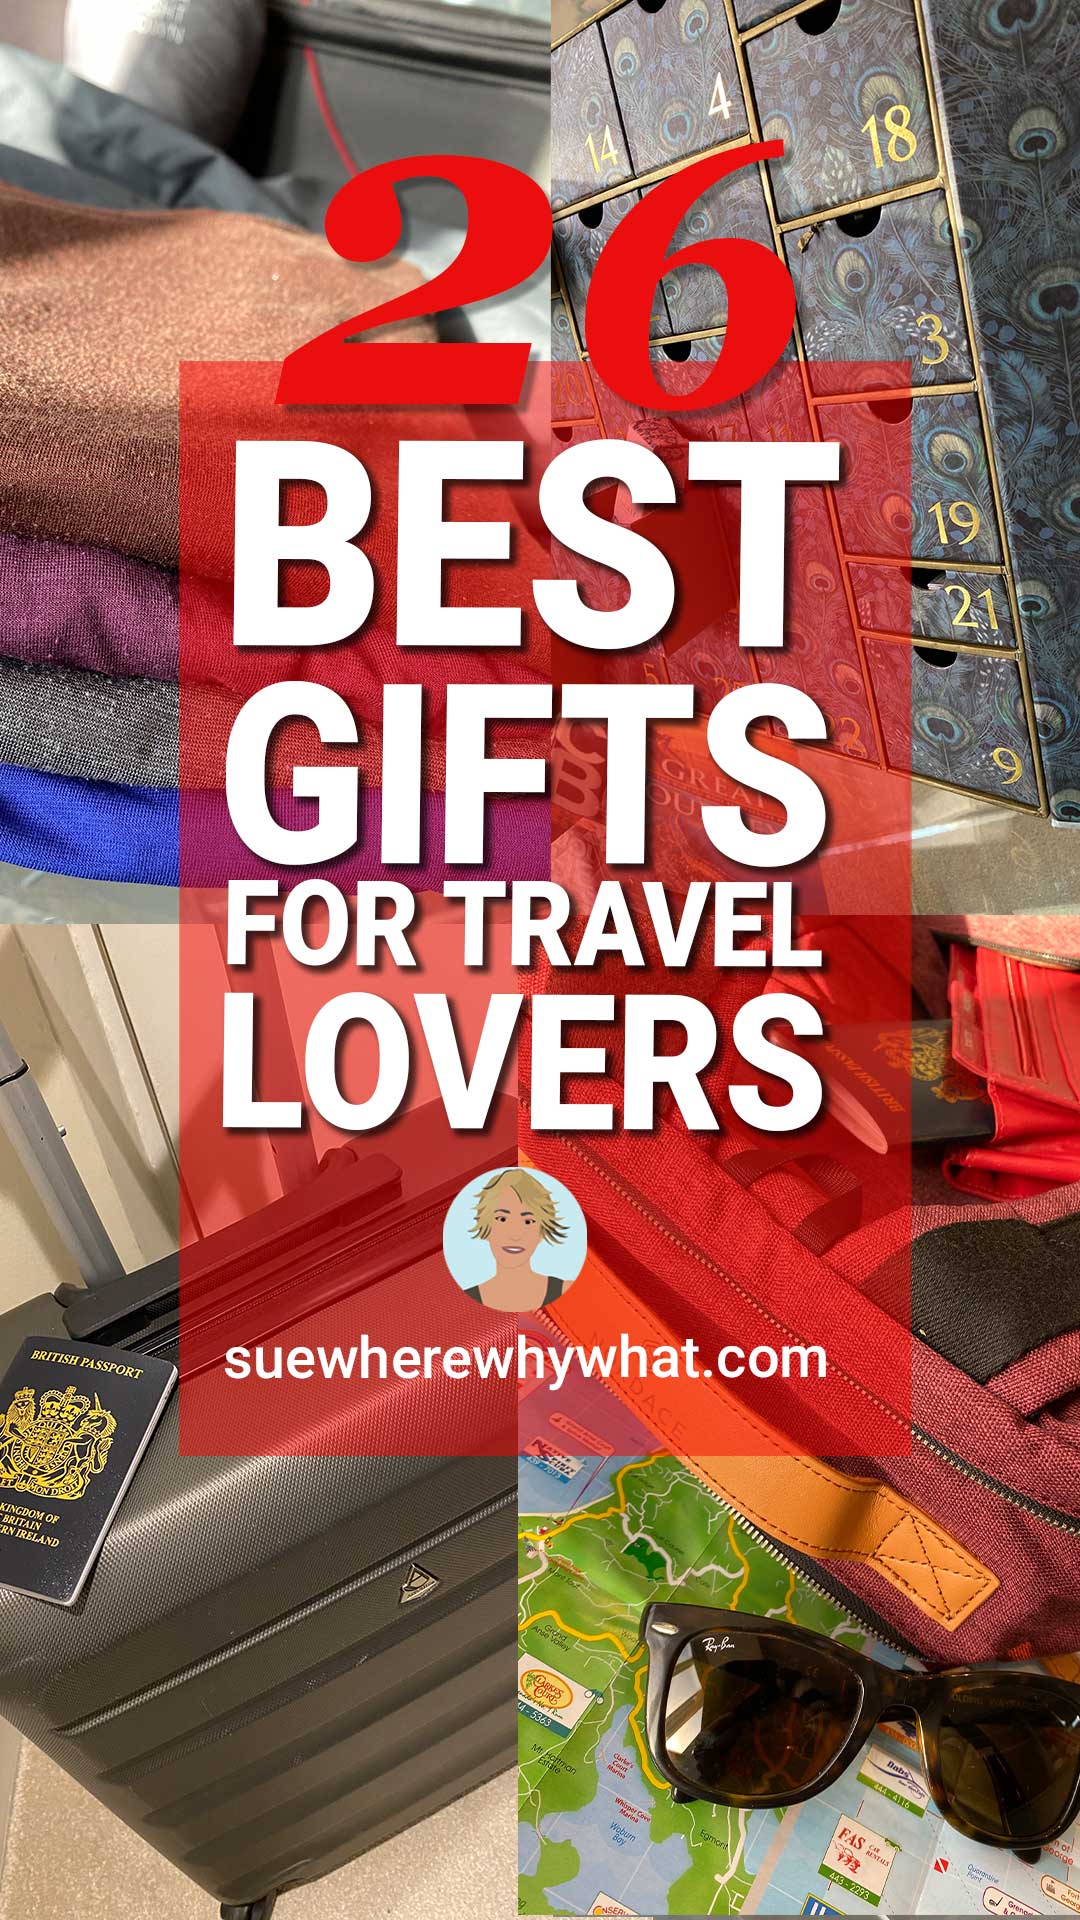 26 of the Best Gifts for Travel Lovers